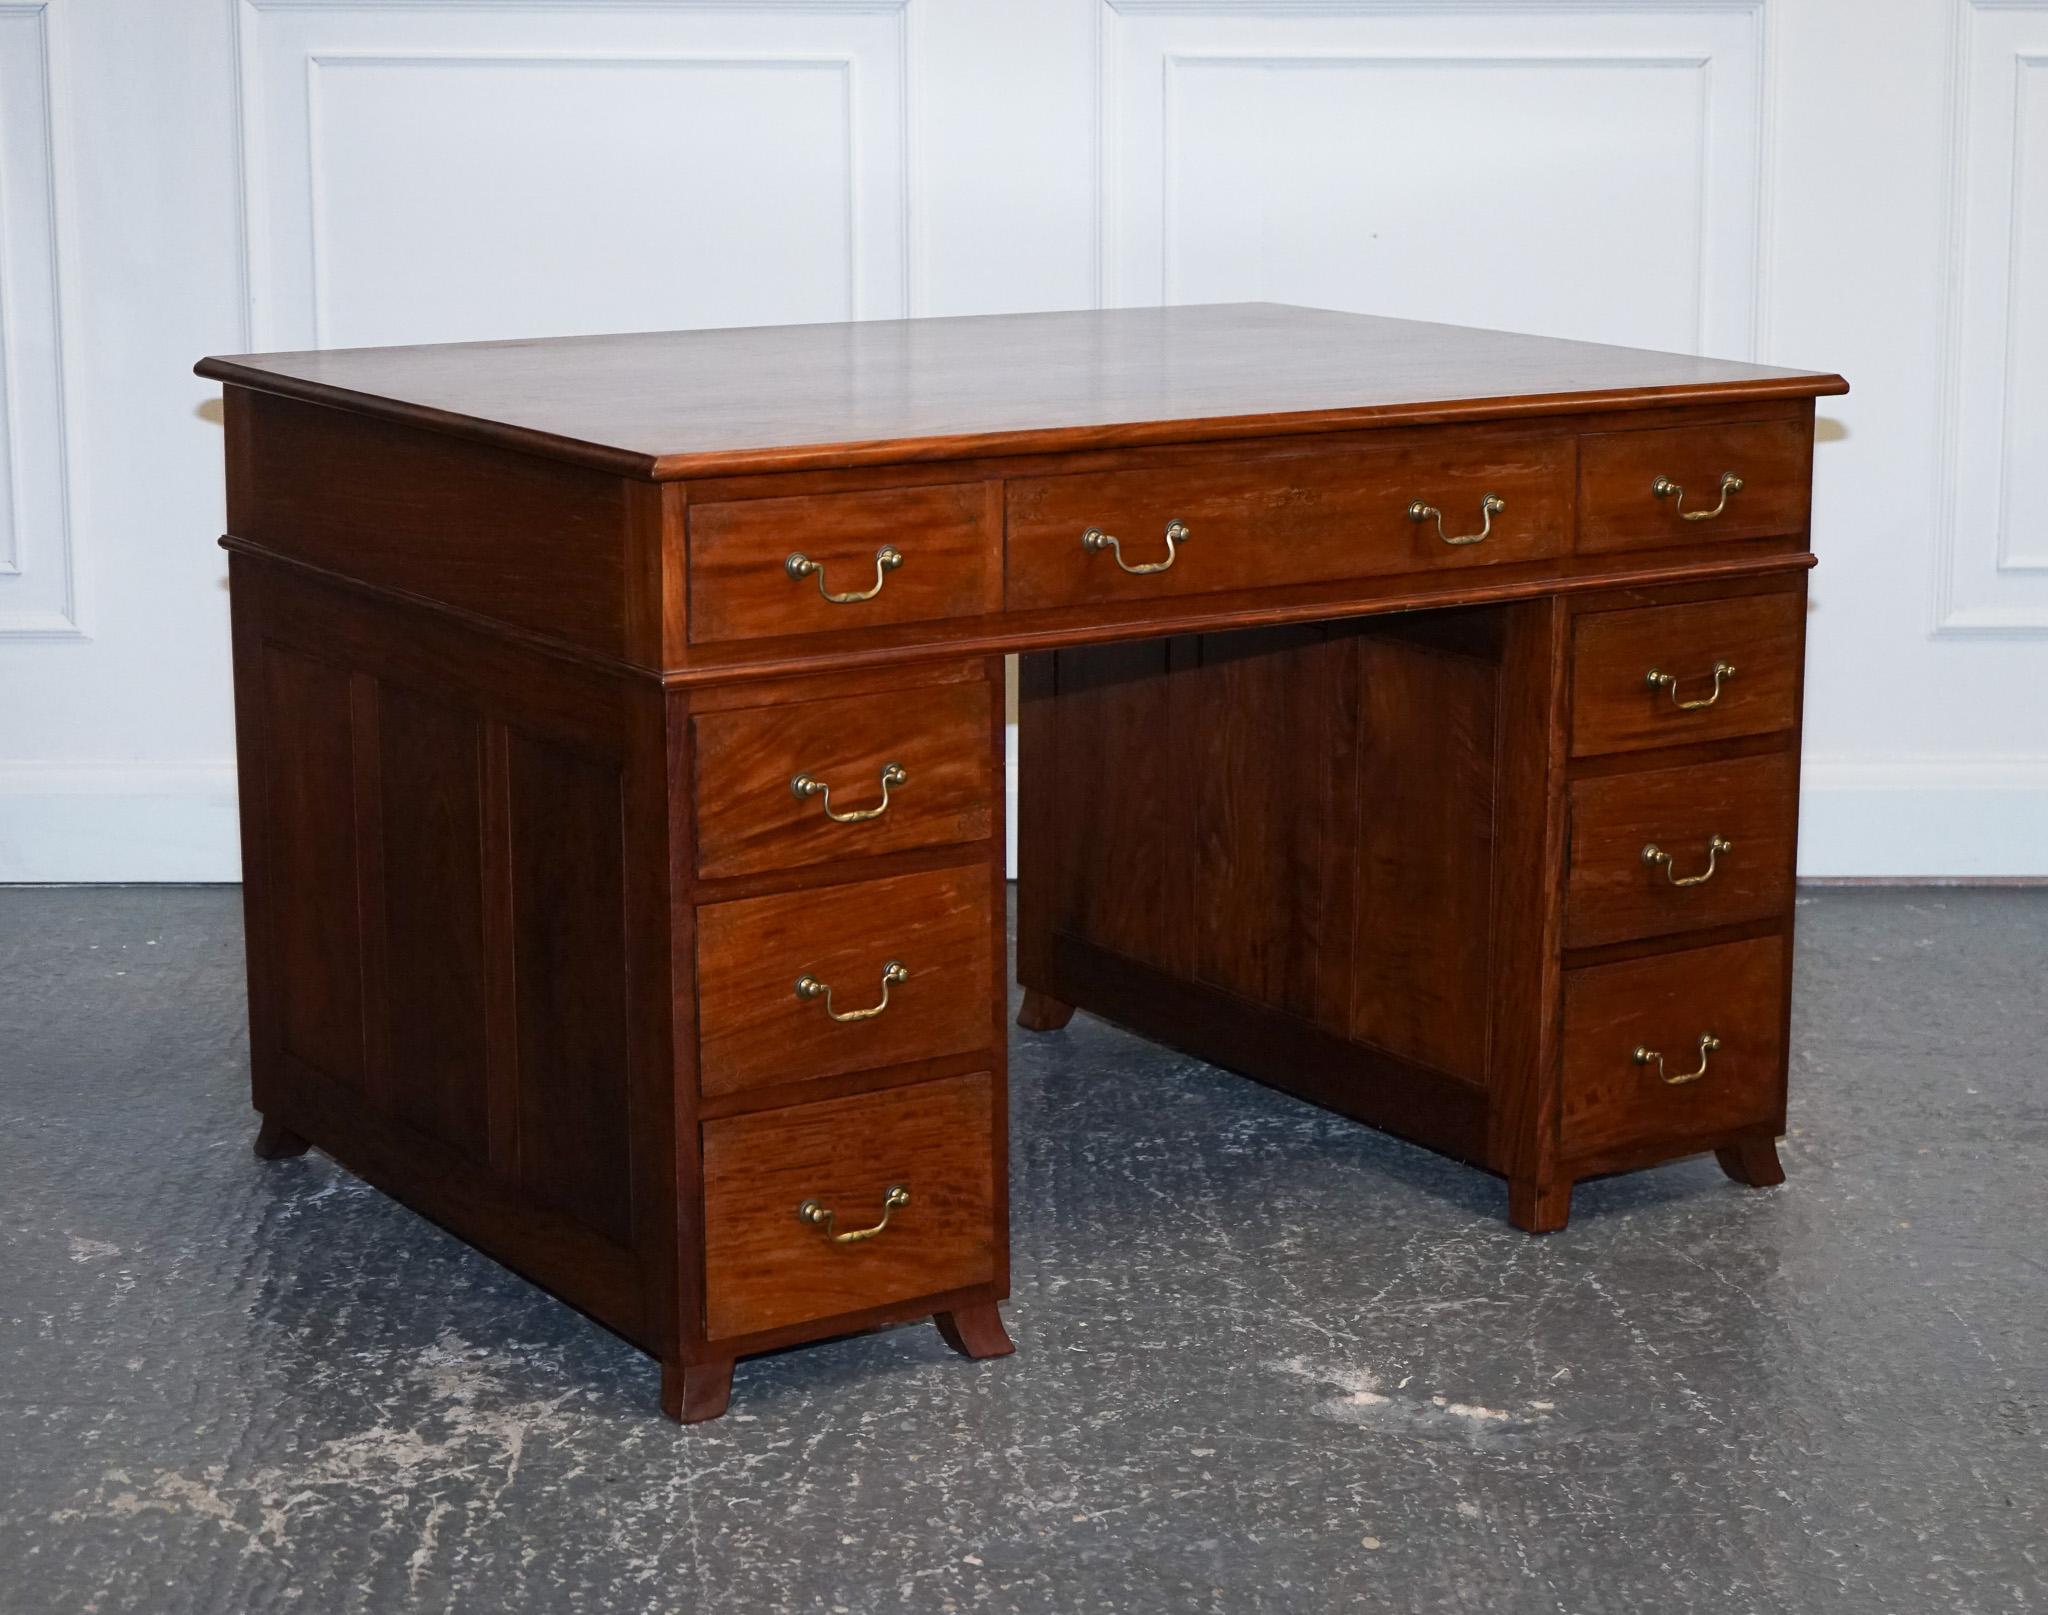 We are delighted to offer for sale this Stunning M. Hayat & Bros Anglo Indian Twin Pedestal Desk.

The M. Hayat & Bros Anglo Indian Twin Pedestal Partners Desk is an exquisite piece of furniture that exudes elegance and class. This desk is